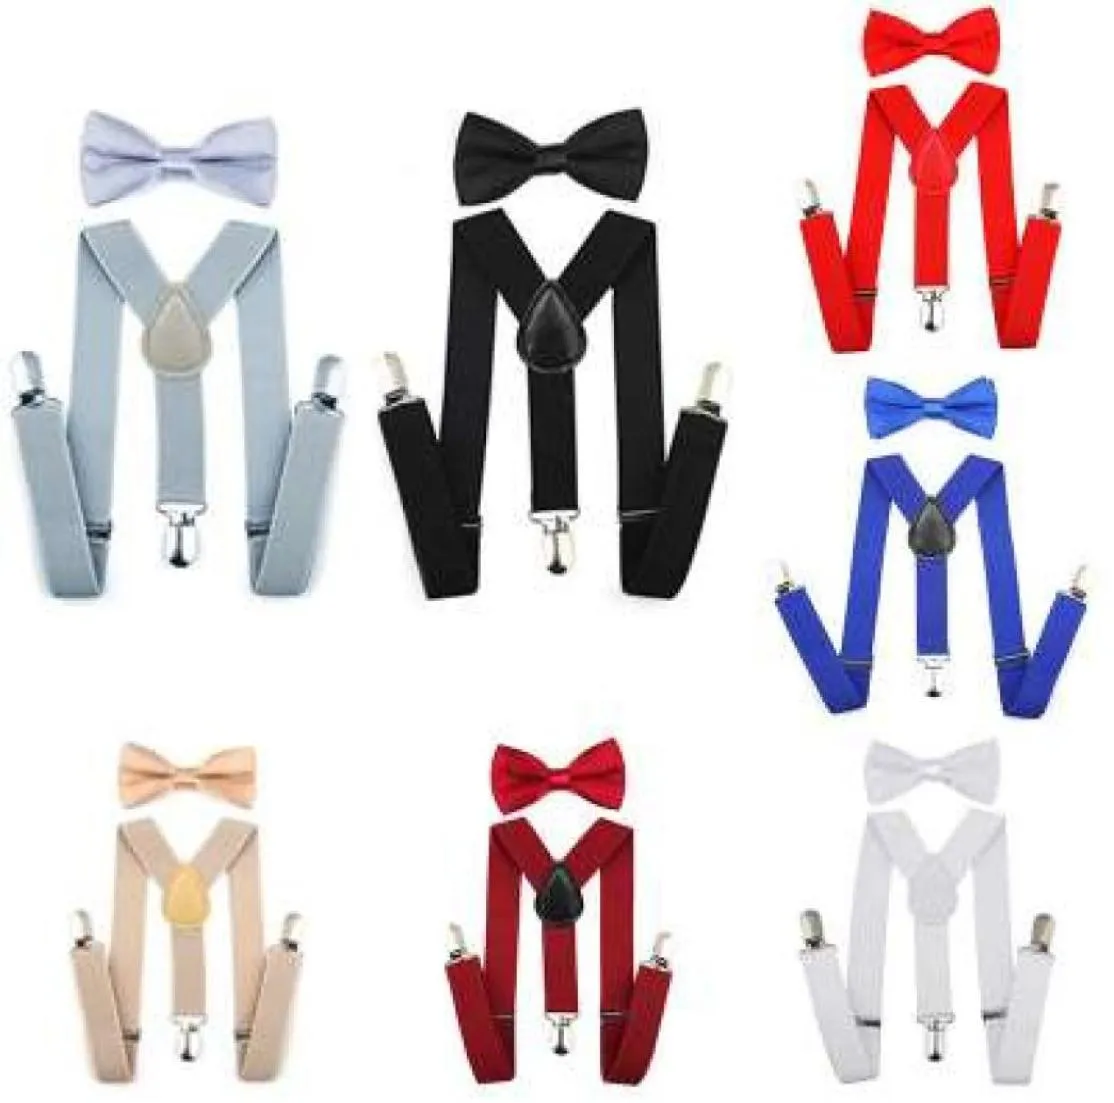 Adjustable Elastic Kids Suspenders With Bowtie Bow Tie Set Matching Ties Outfits Suspender For Girl Boy 7 Colors BBYES3762656